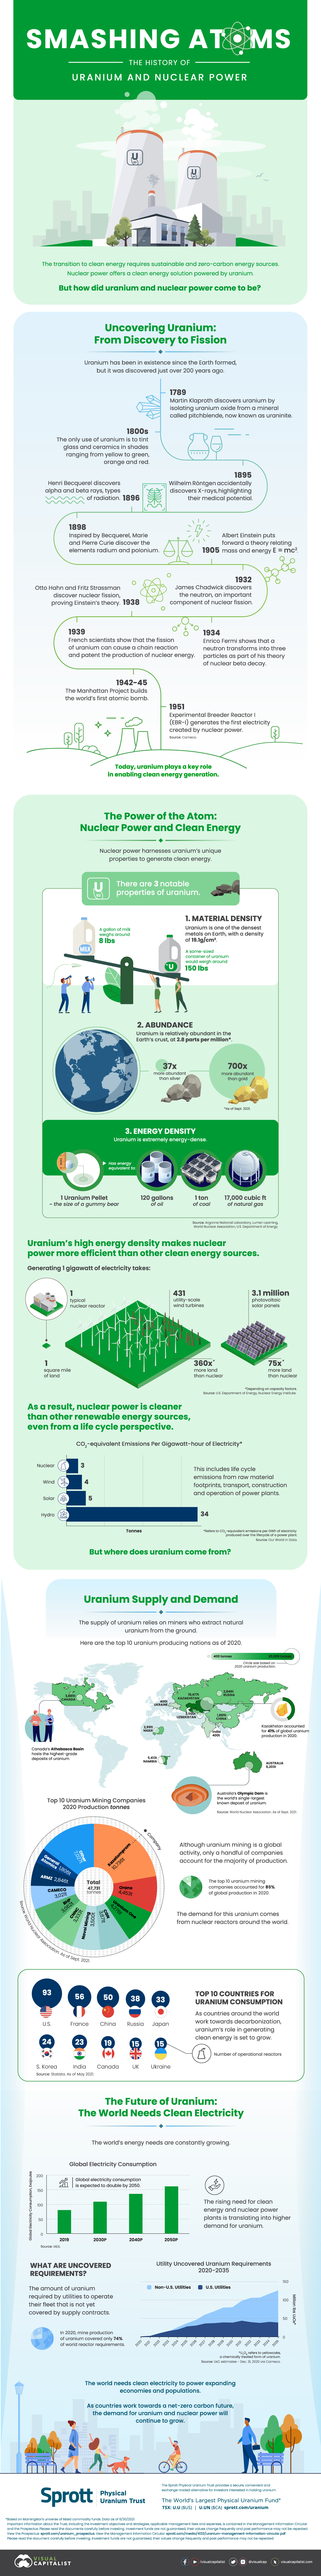 uranium and nuclear power infographic